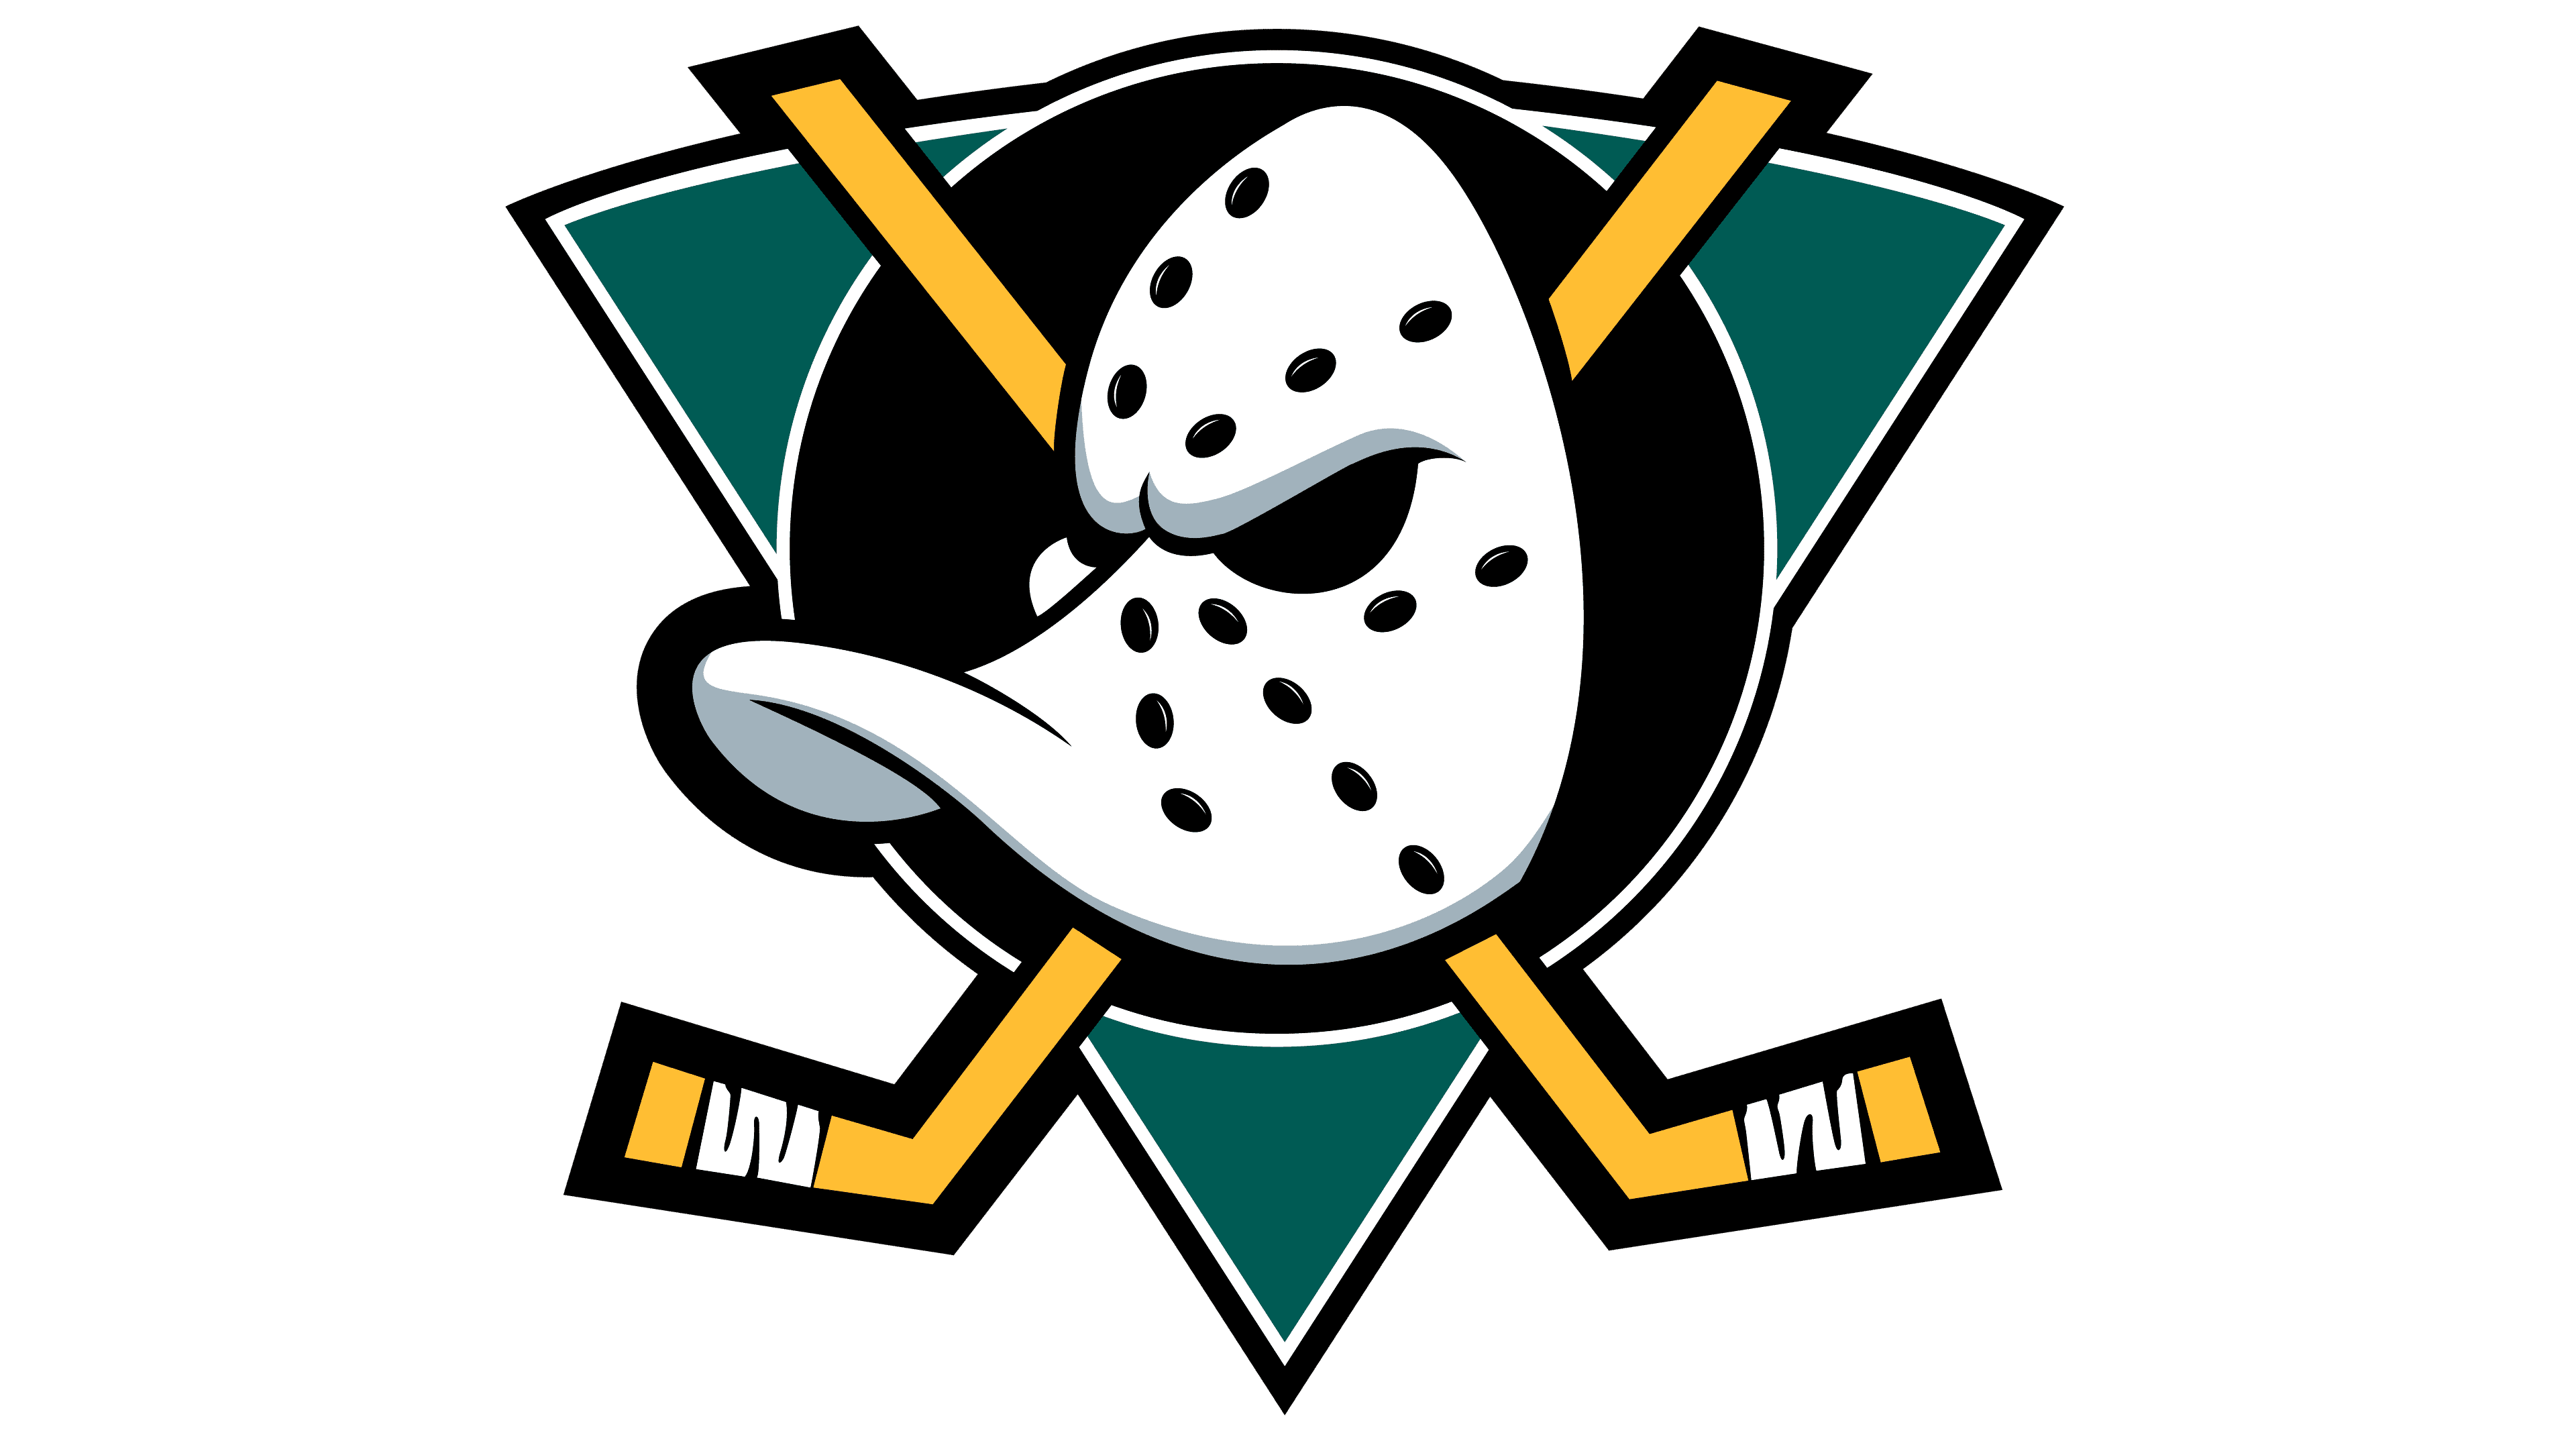 Anaheim Ducks Logo, PNG, Symbol, History, Meaning